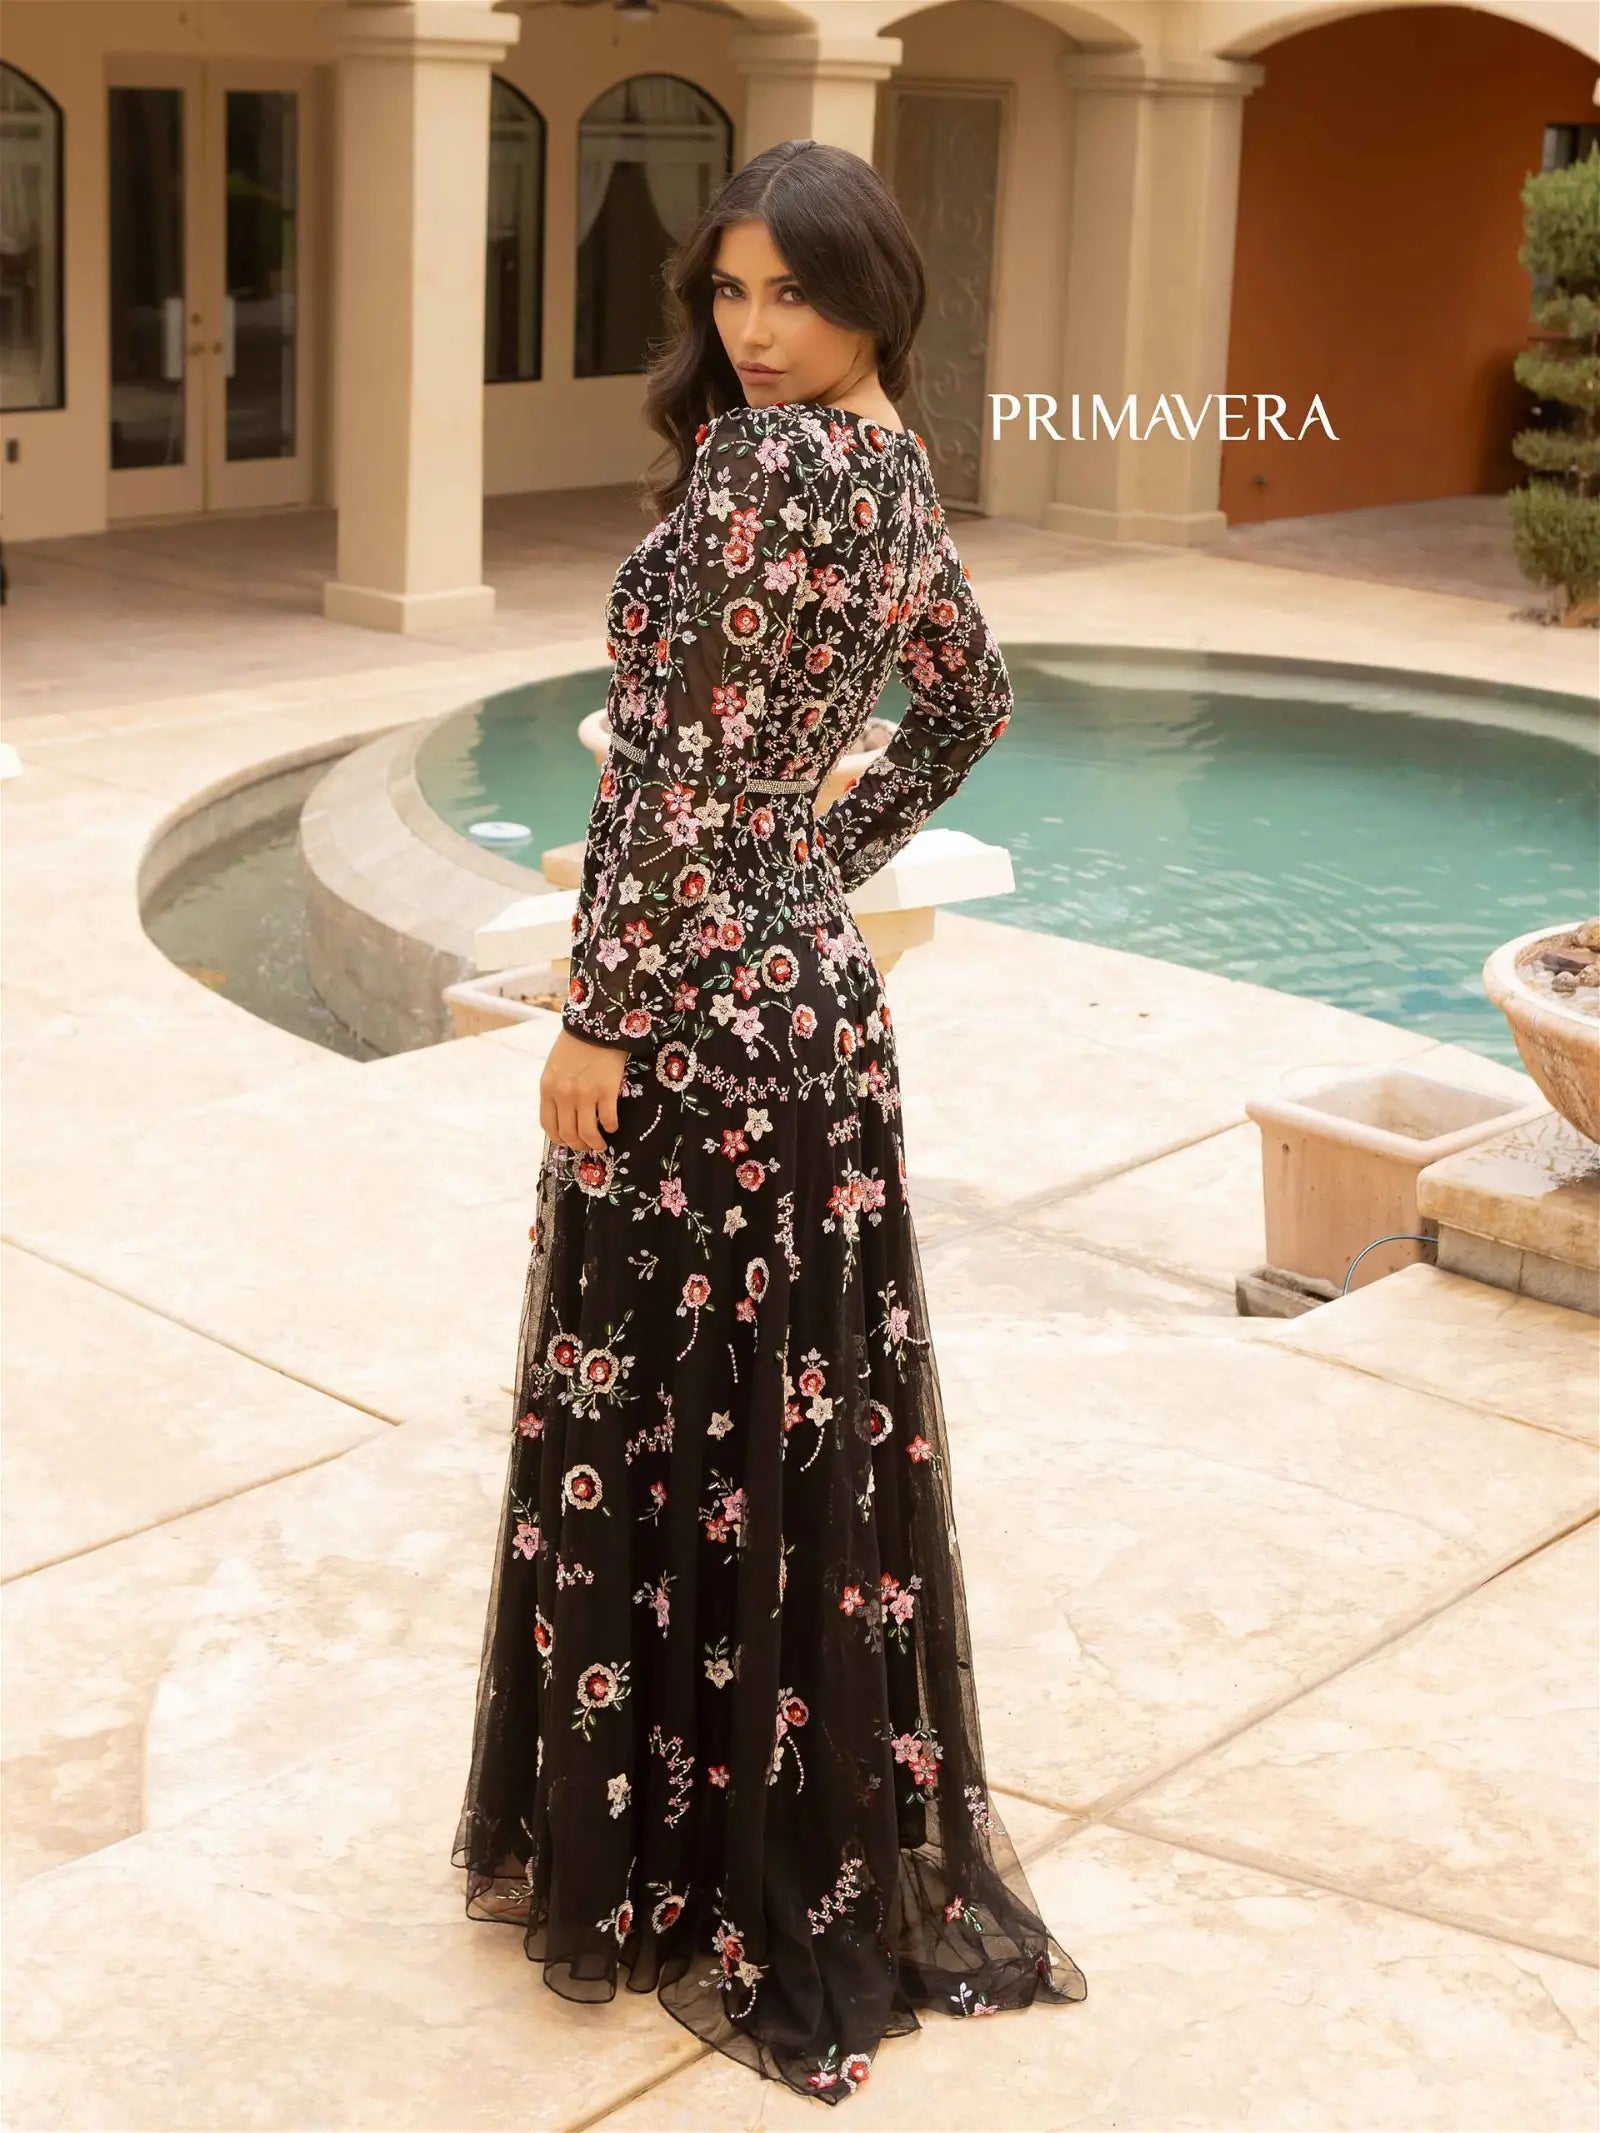 Primavera Couture 12006 Prom Dress Long Beaded Dress. This gown has sheer arms with beaded flowers all over. 